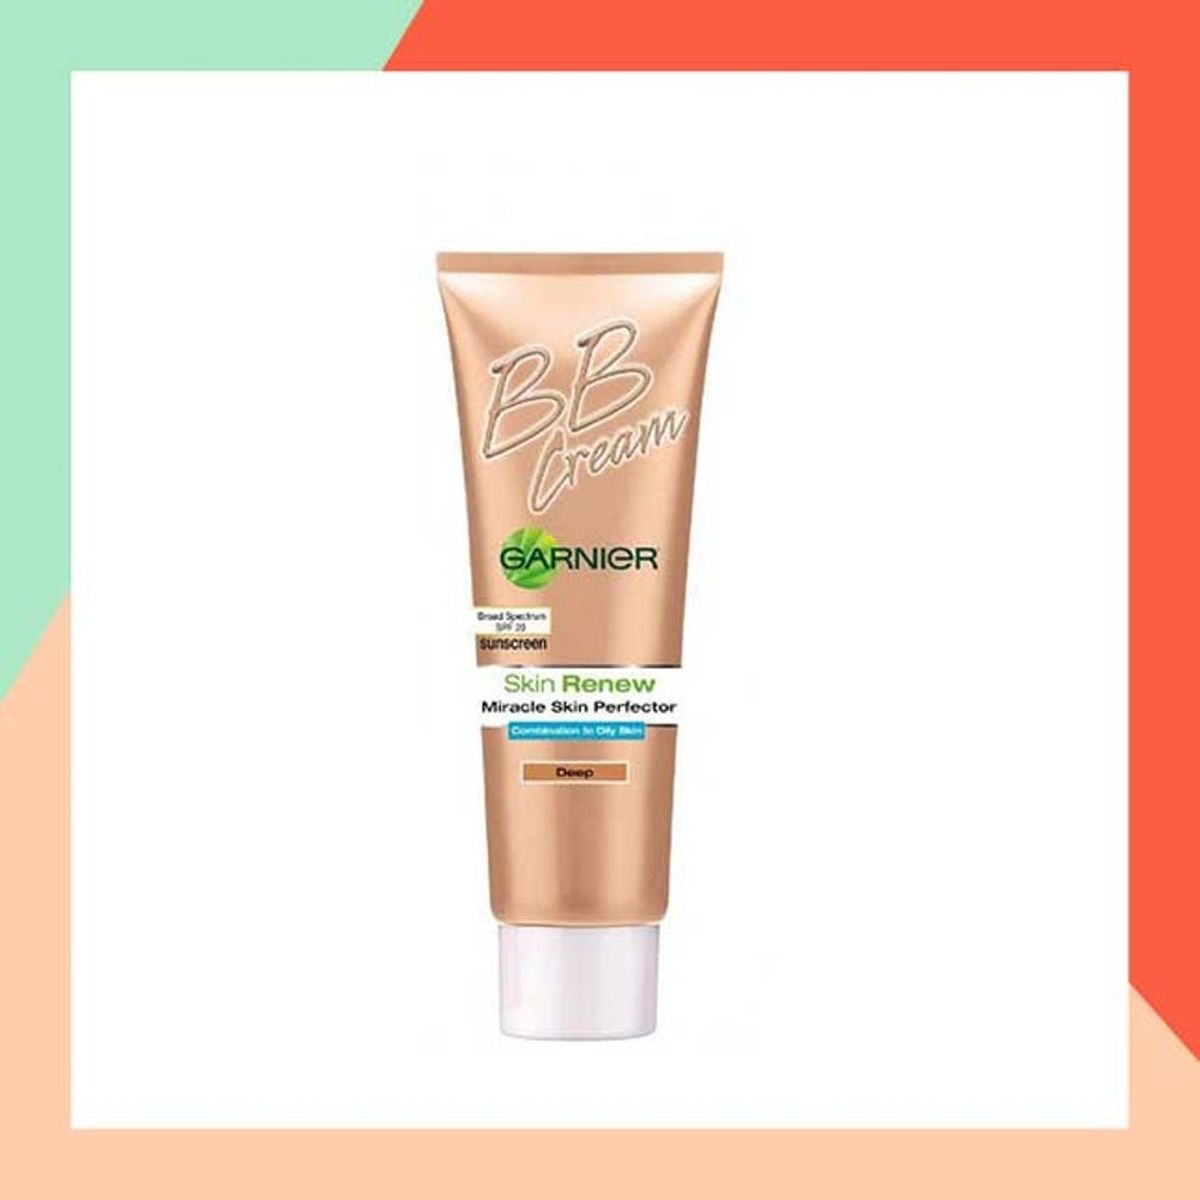 5 BB Creams So Good, They’ll Change Your Beauty Routine Forever